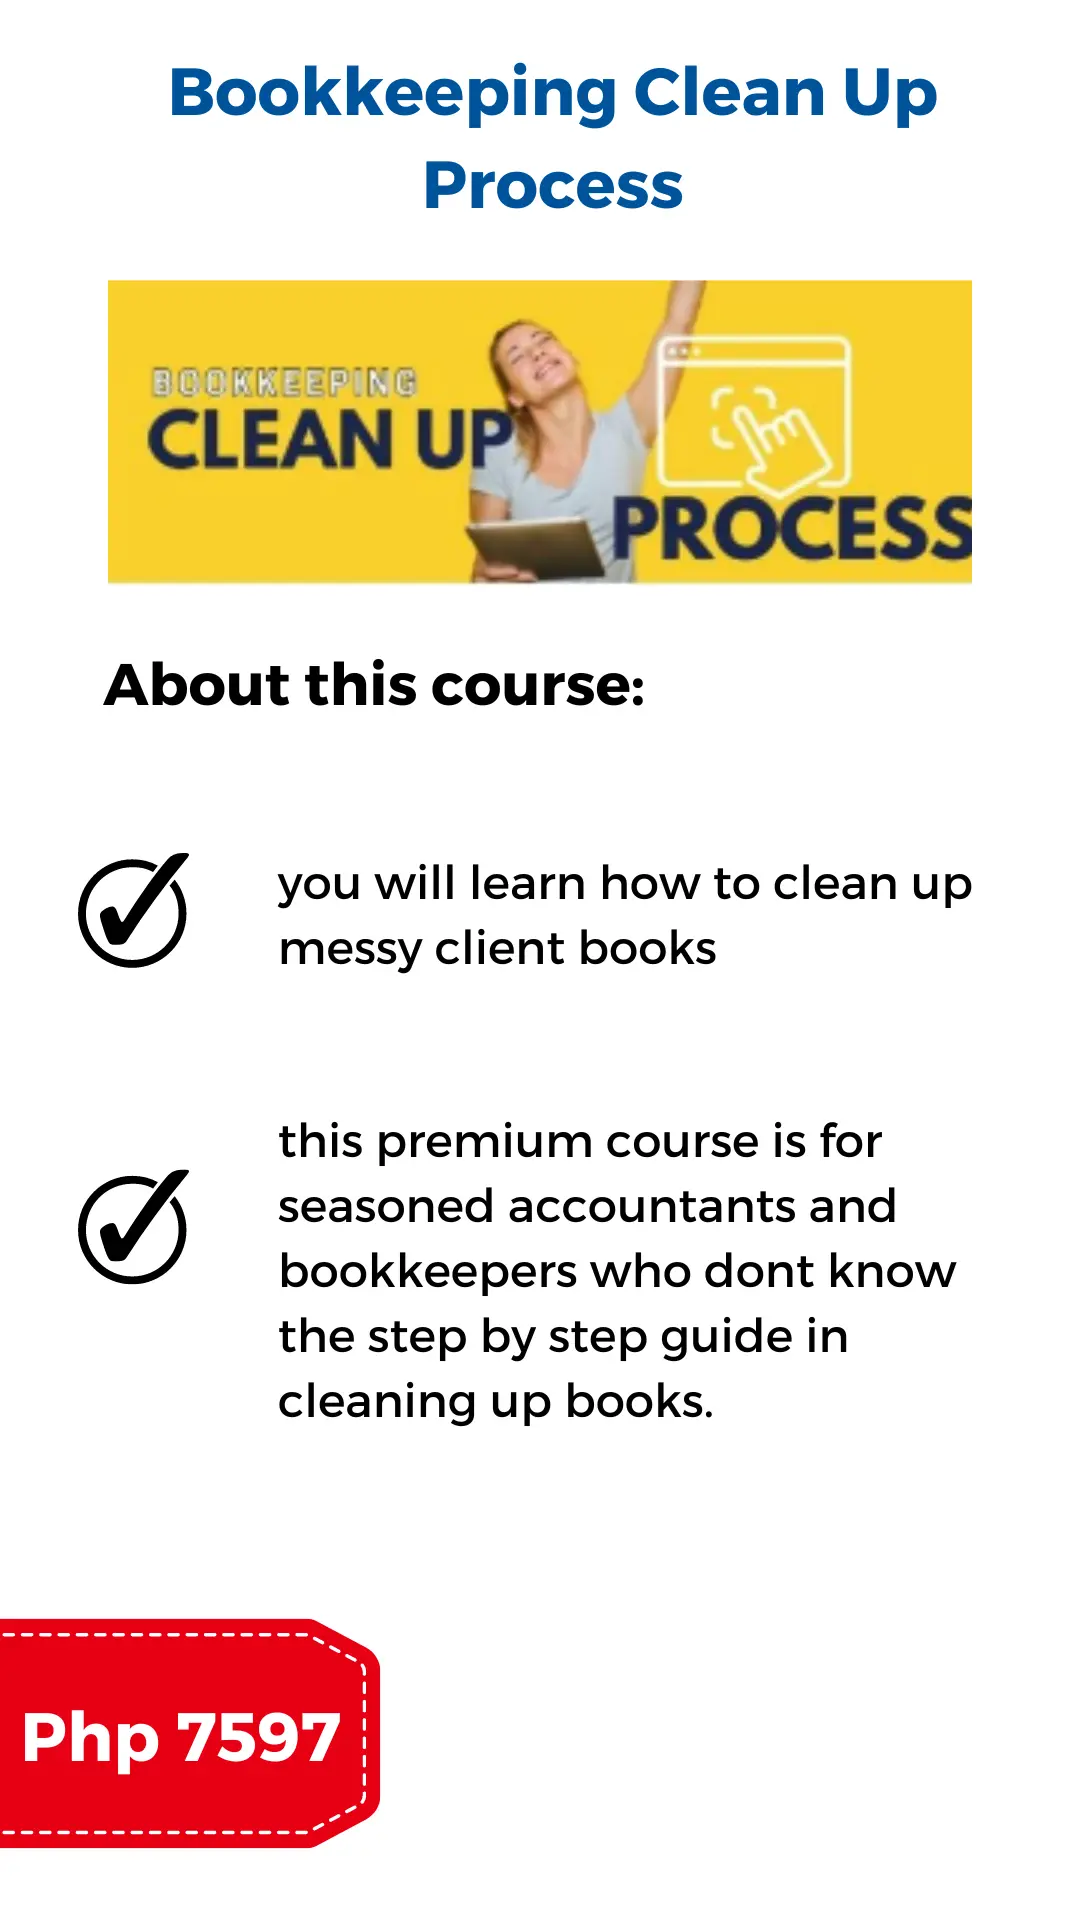 image with online course message - bookkeeping cleanup course